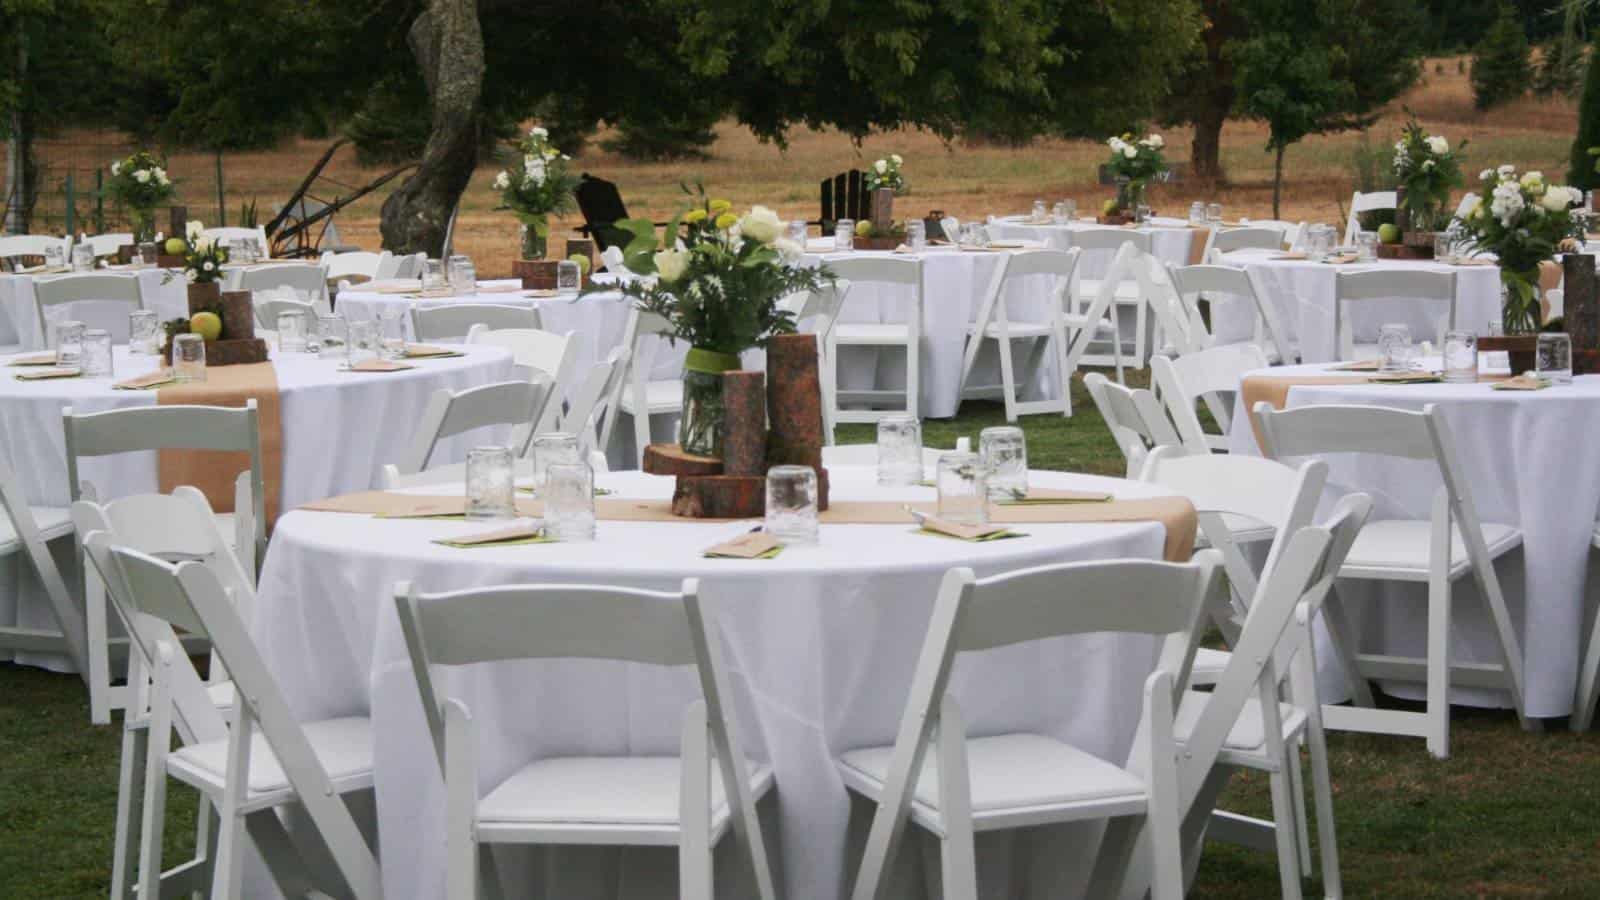 Multiple round tables with white chairs and white tablecloths all set up for an event on green grass next to large green trees